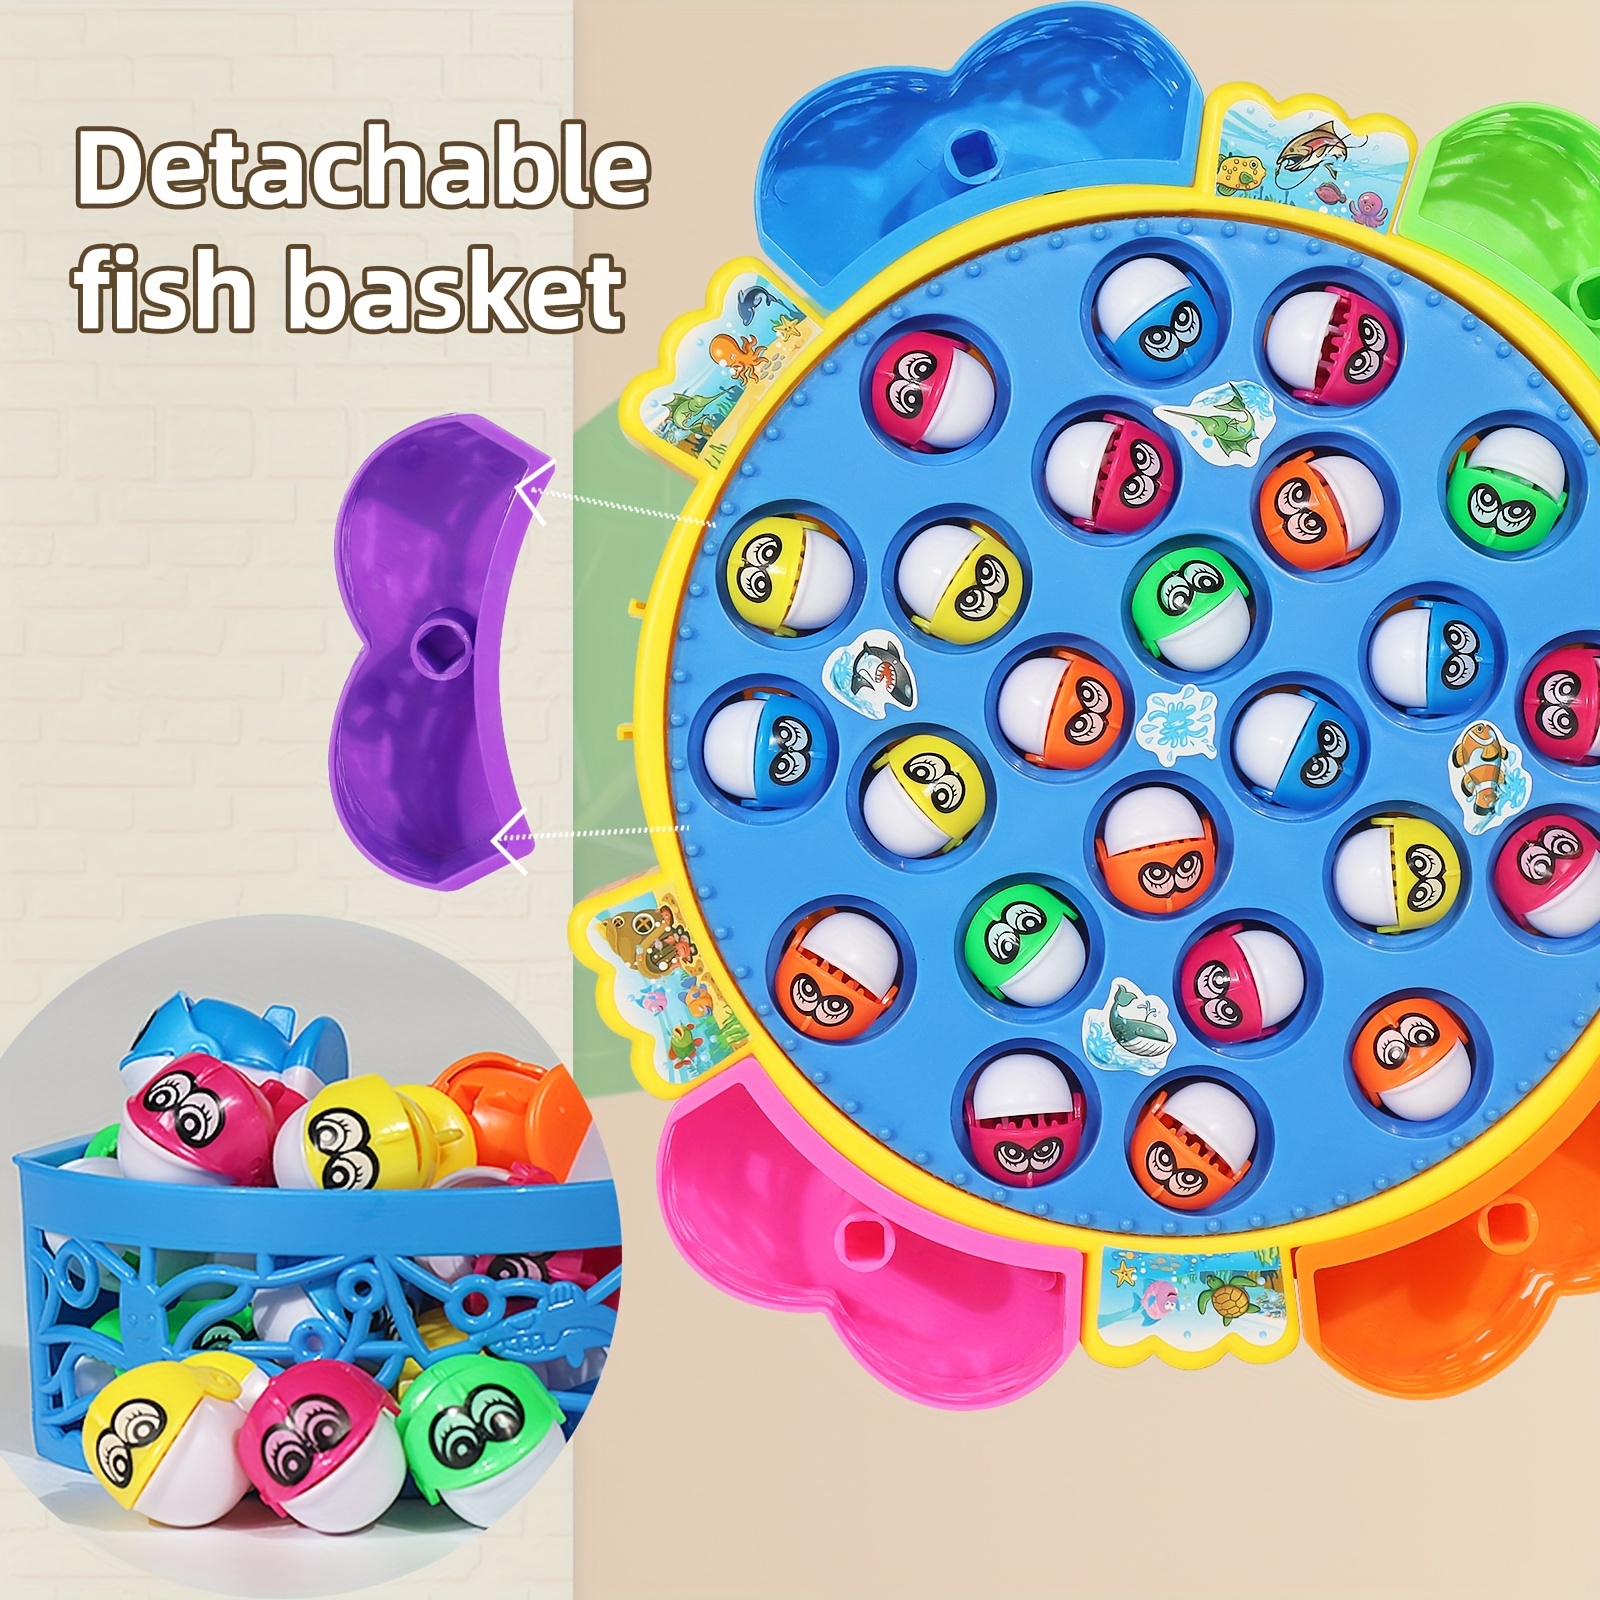 Magnetic fishing game - Tropical fishing - Toys for toddlers